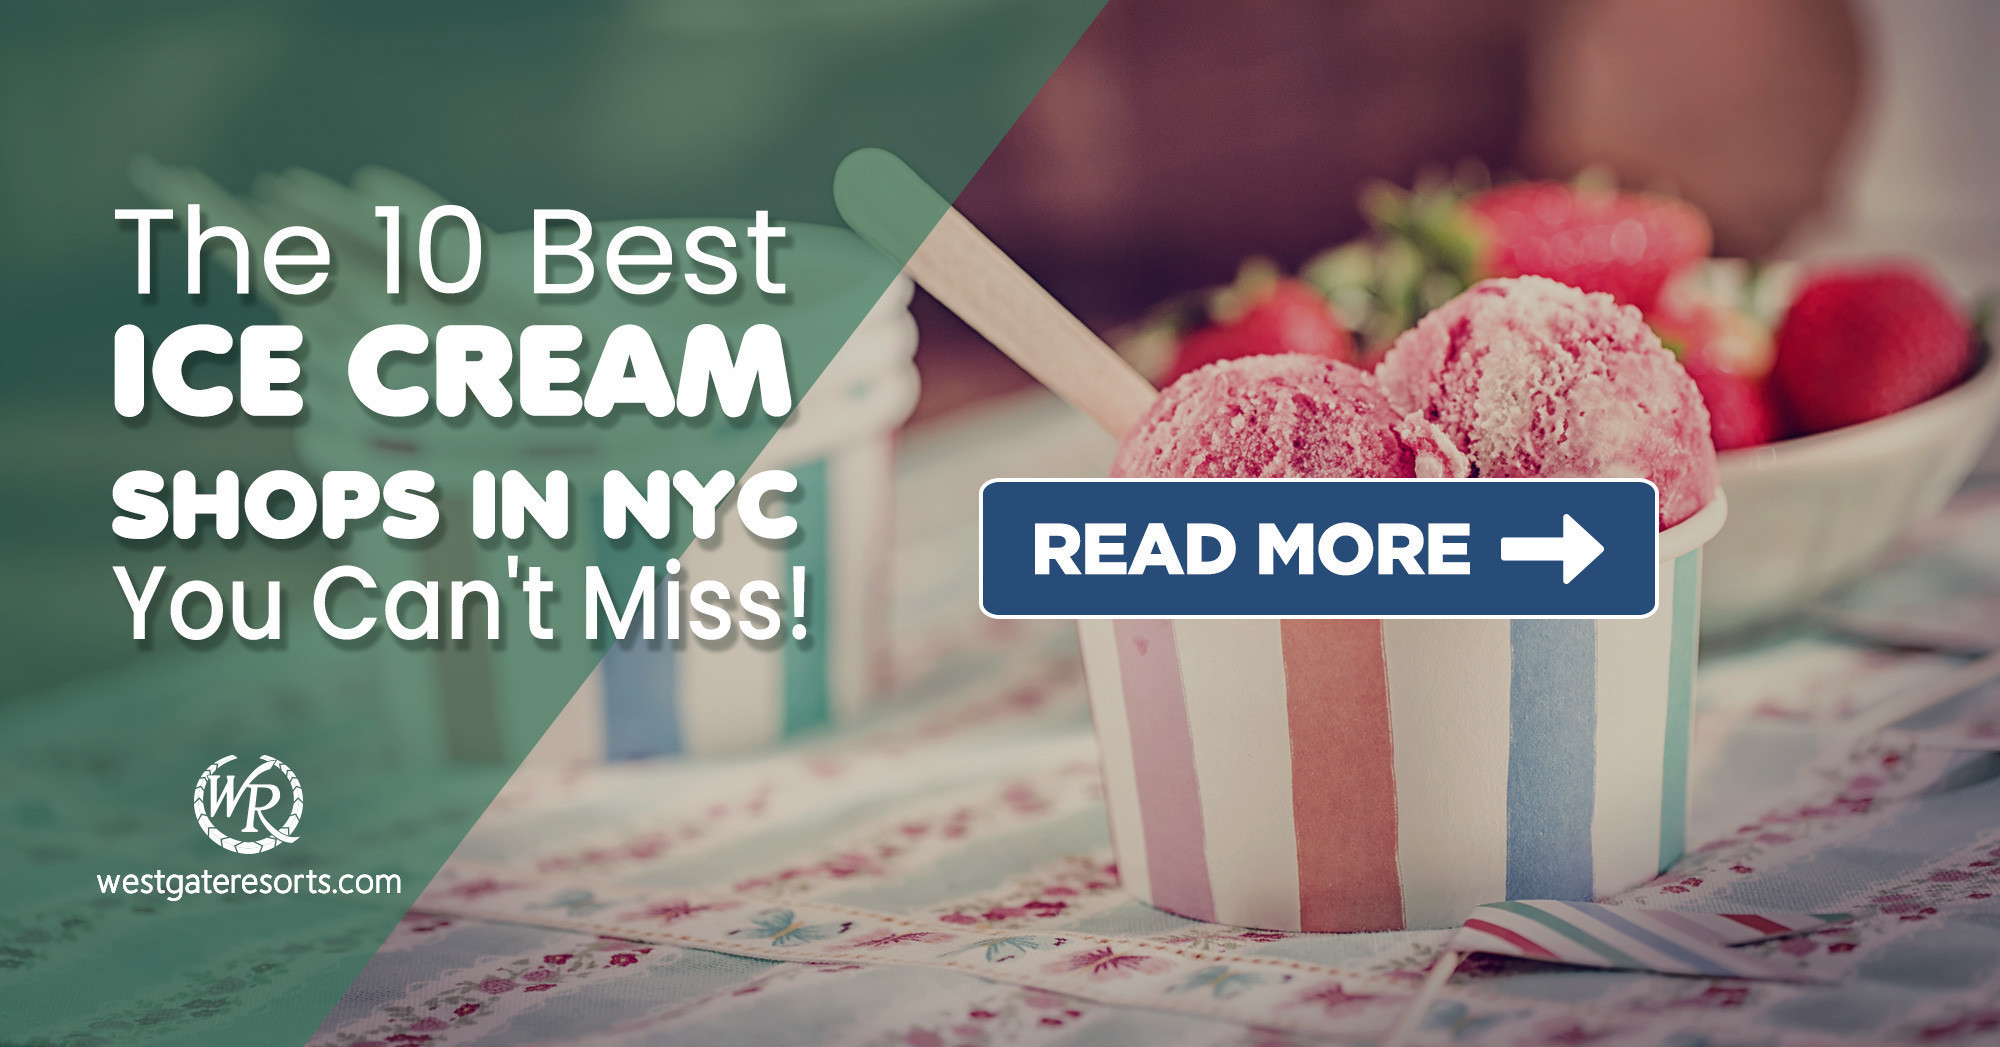 The 10 Best Ice Cream Shops In NYC To Keep You Chill!